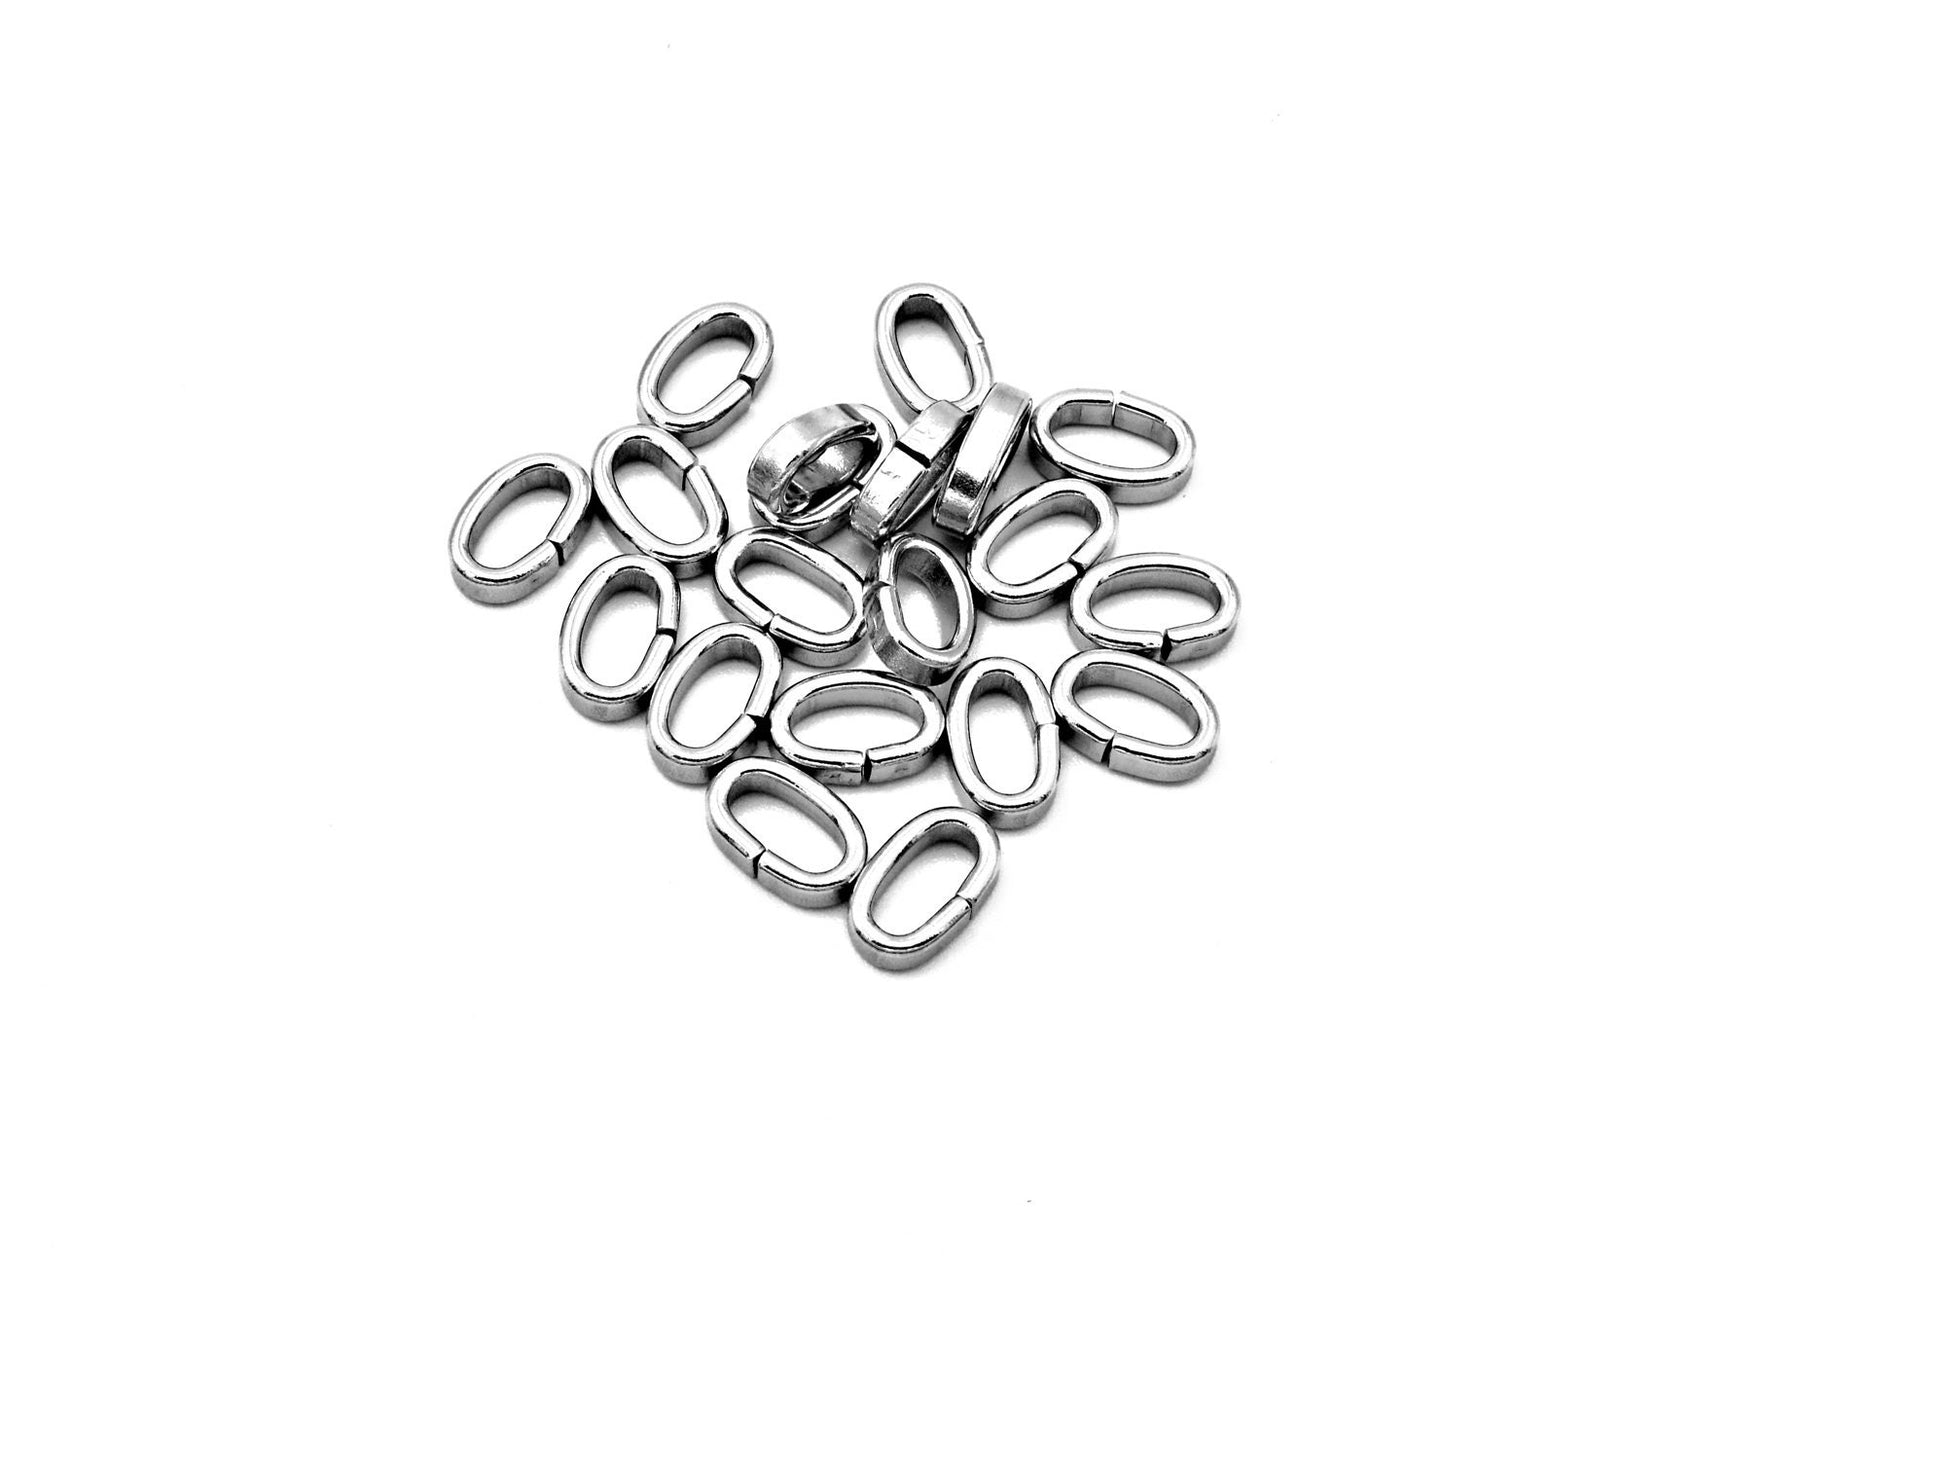 20 PCs Stainless Steel Oval Roundel Jump Ring Plain Spacer Beads Size 10x6mm Jewelry Findings Supply For Jewelry Making and Wholesale